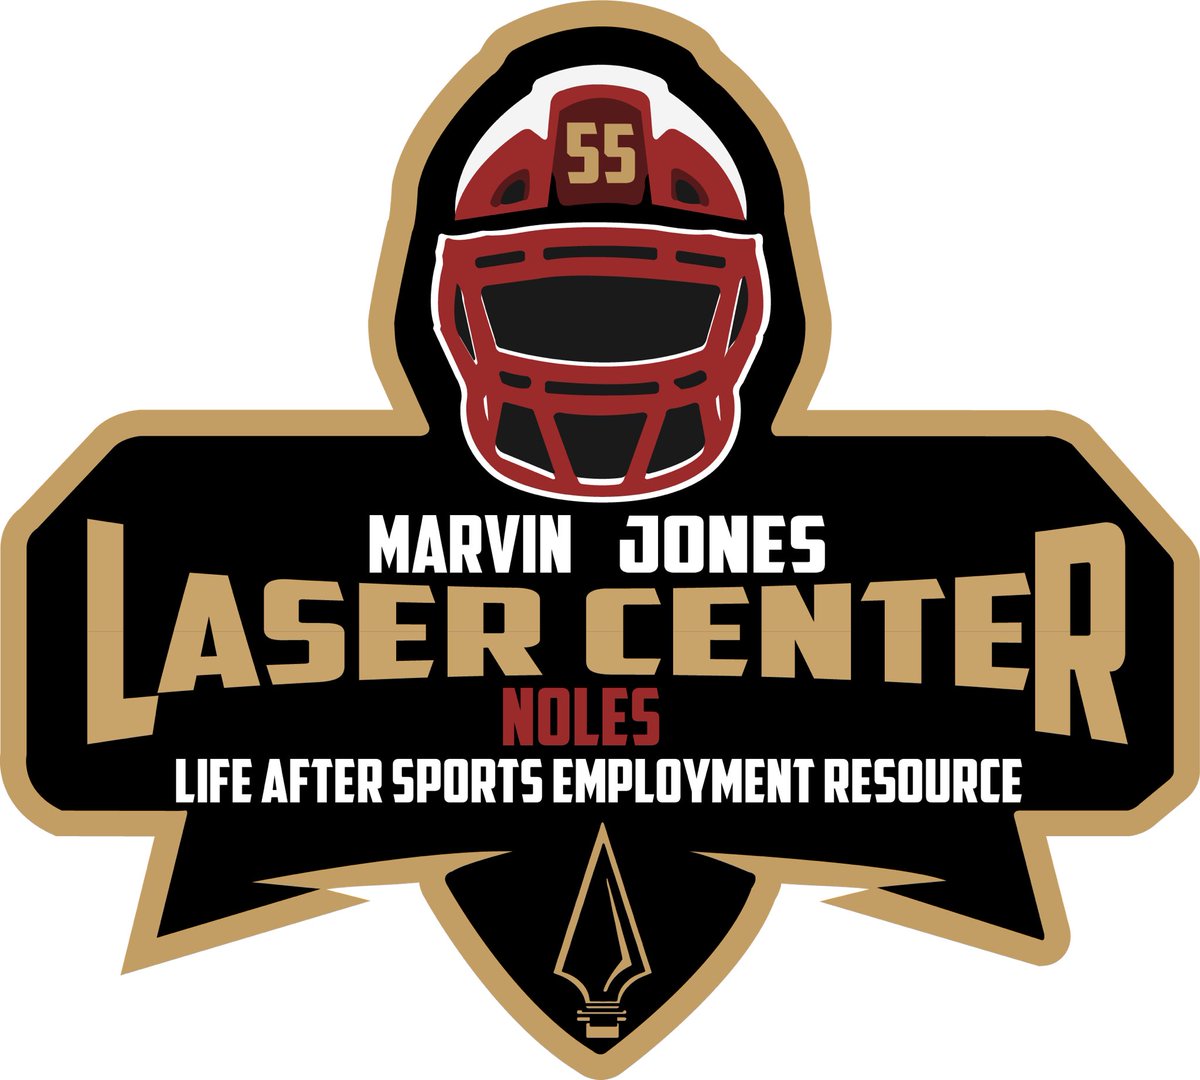 @Micconope1851 @MarvinJonesJets @MarvJonesCfhof using NIL to build futures for all #FSU student-athletes. The Marvin Jones Laser Center will further the excellence of our athletes when their playing time is up. #FsuTwitter #NilDoneRight #FsuFootball #LifeAfterSports